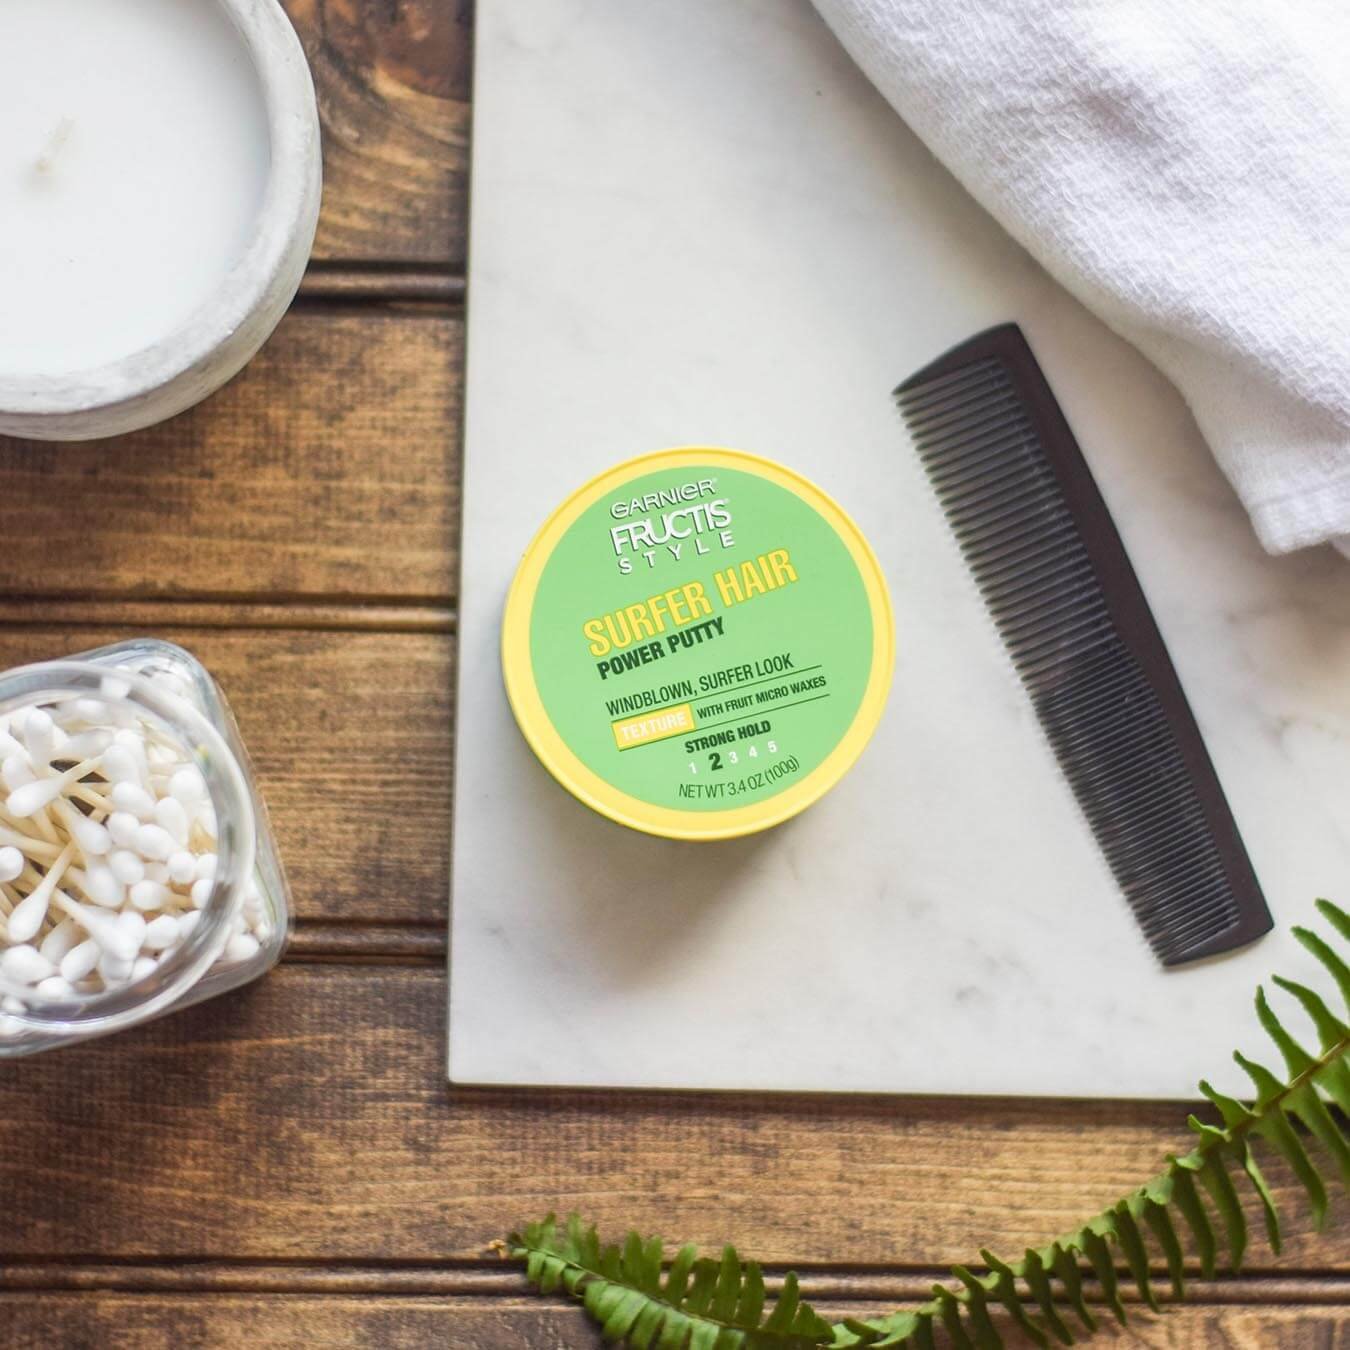 Garnier Fructis Style Surfer Hair Power Putty on a white marble slab with a black comb and white hand towel on a wooden table with a white candle, jar of q-tips, and fern frond.